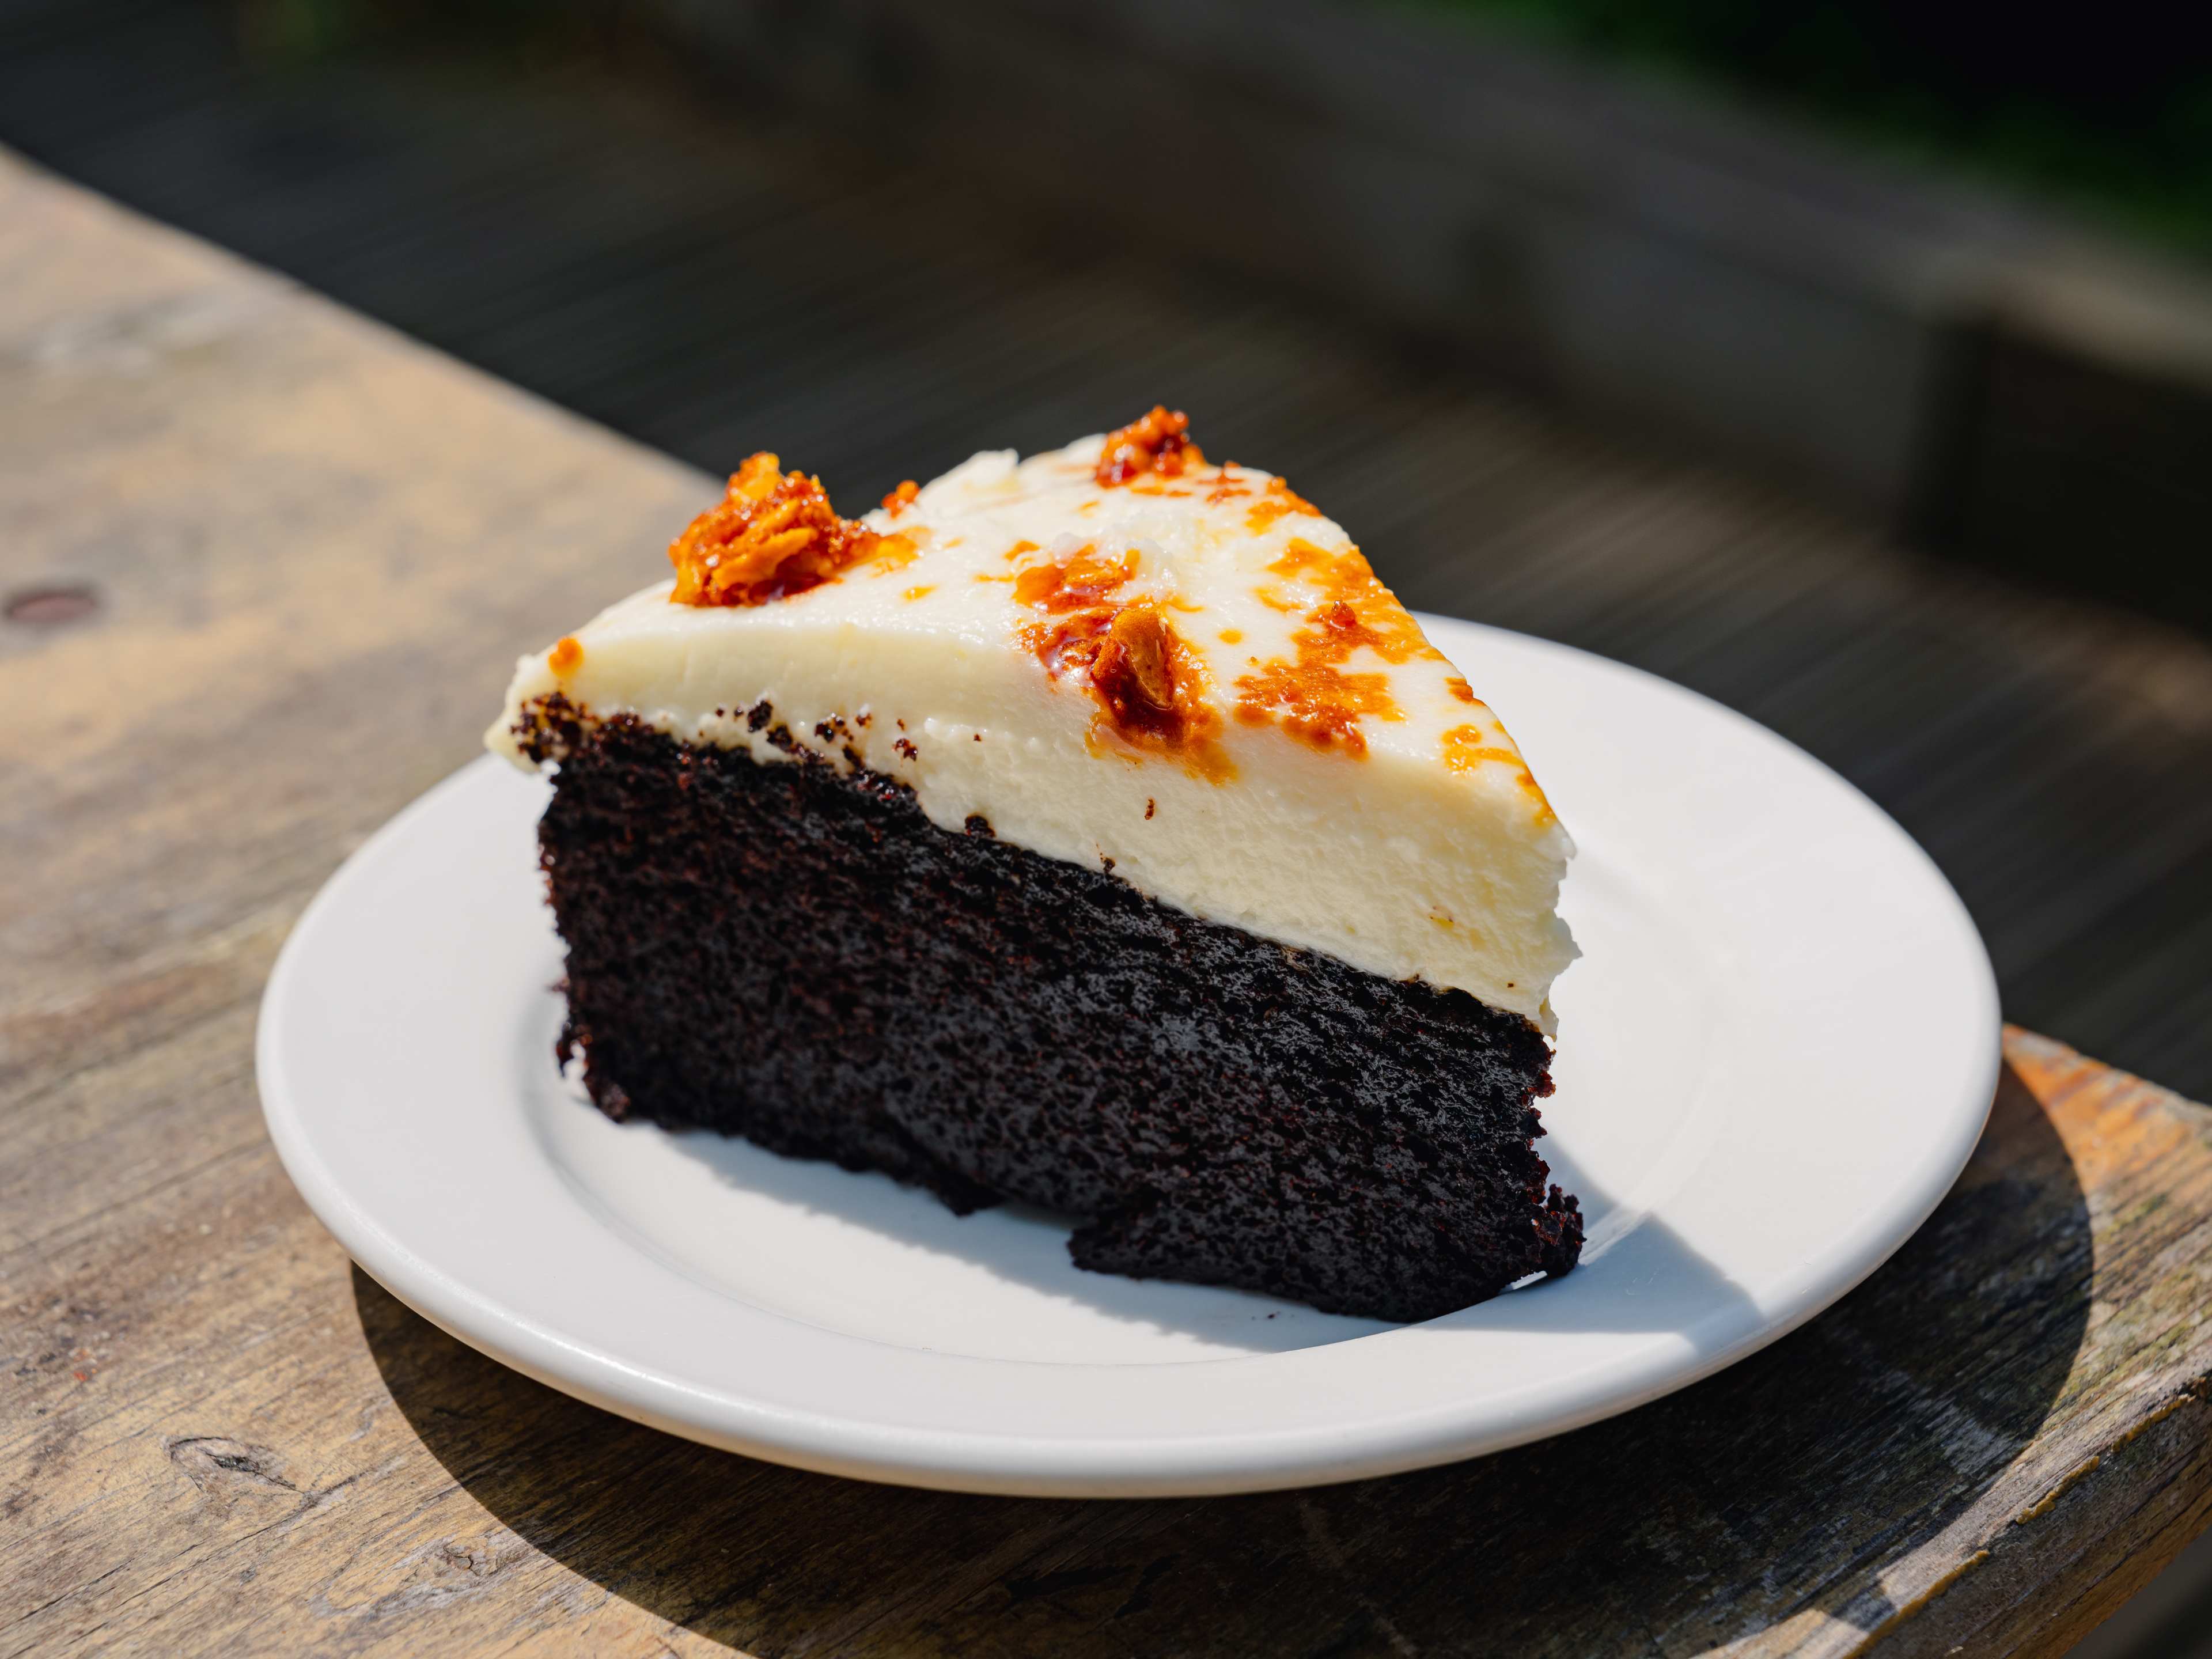 The Guinness cake at The Allotment Kitchen